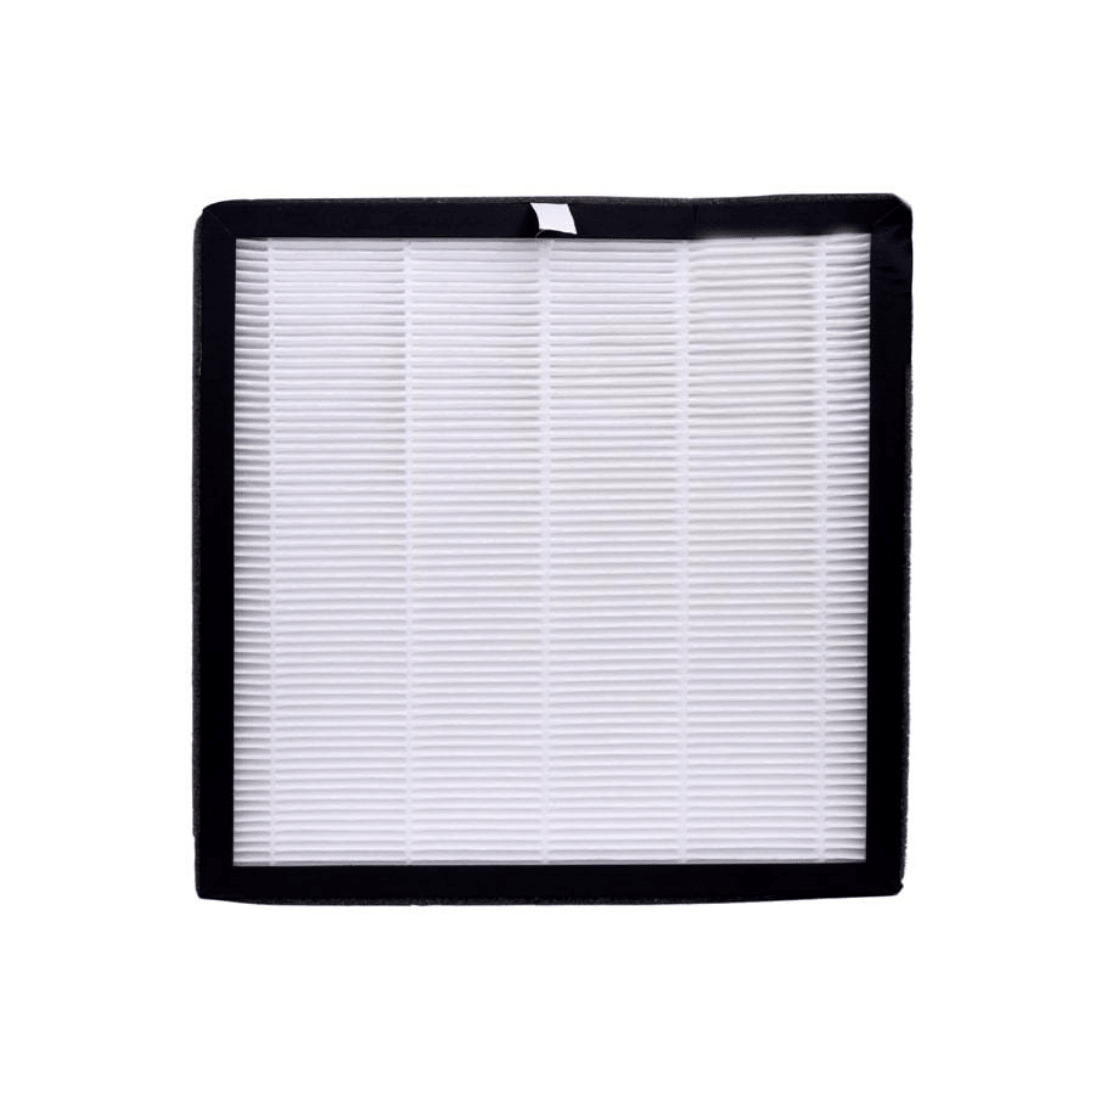 Replacement Filter for NestAir-550™ - Atlanta Healthcare